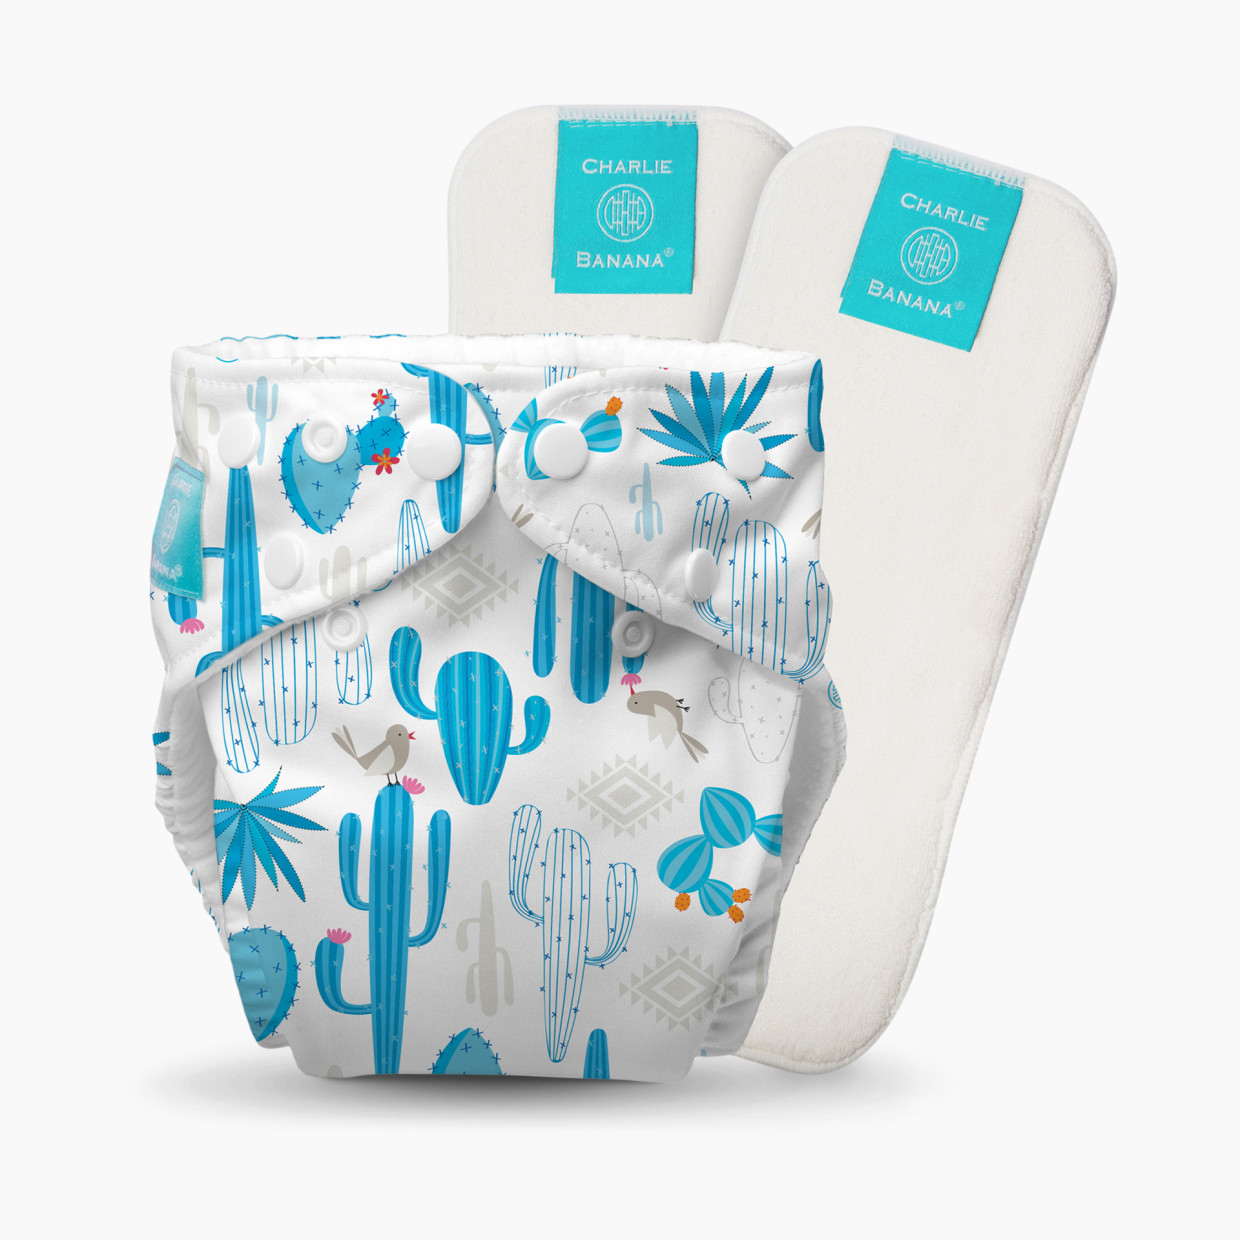 Charlie Banana One-size Reusable Cloth Diaper with 2 Reusable Inserts - Cactus Azul.